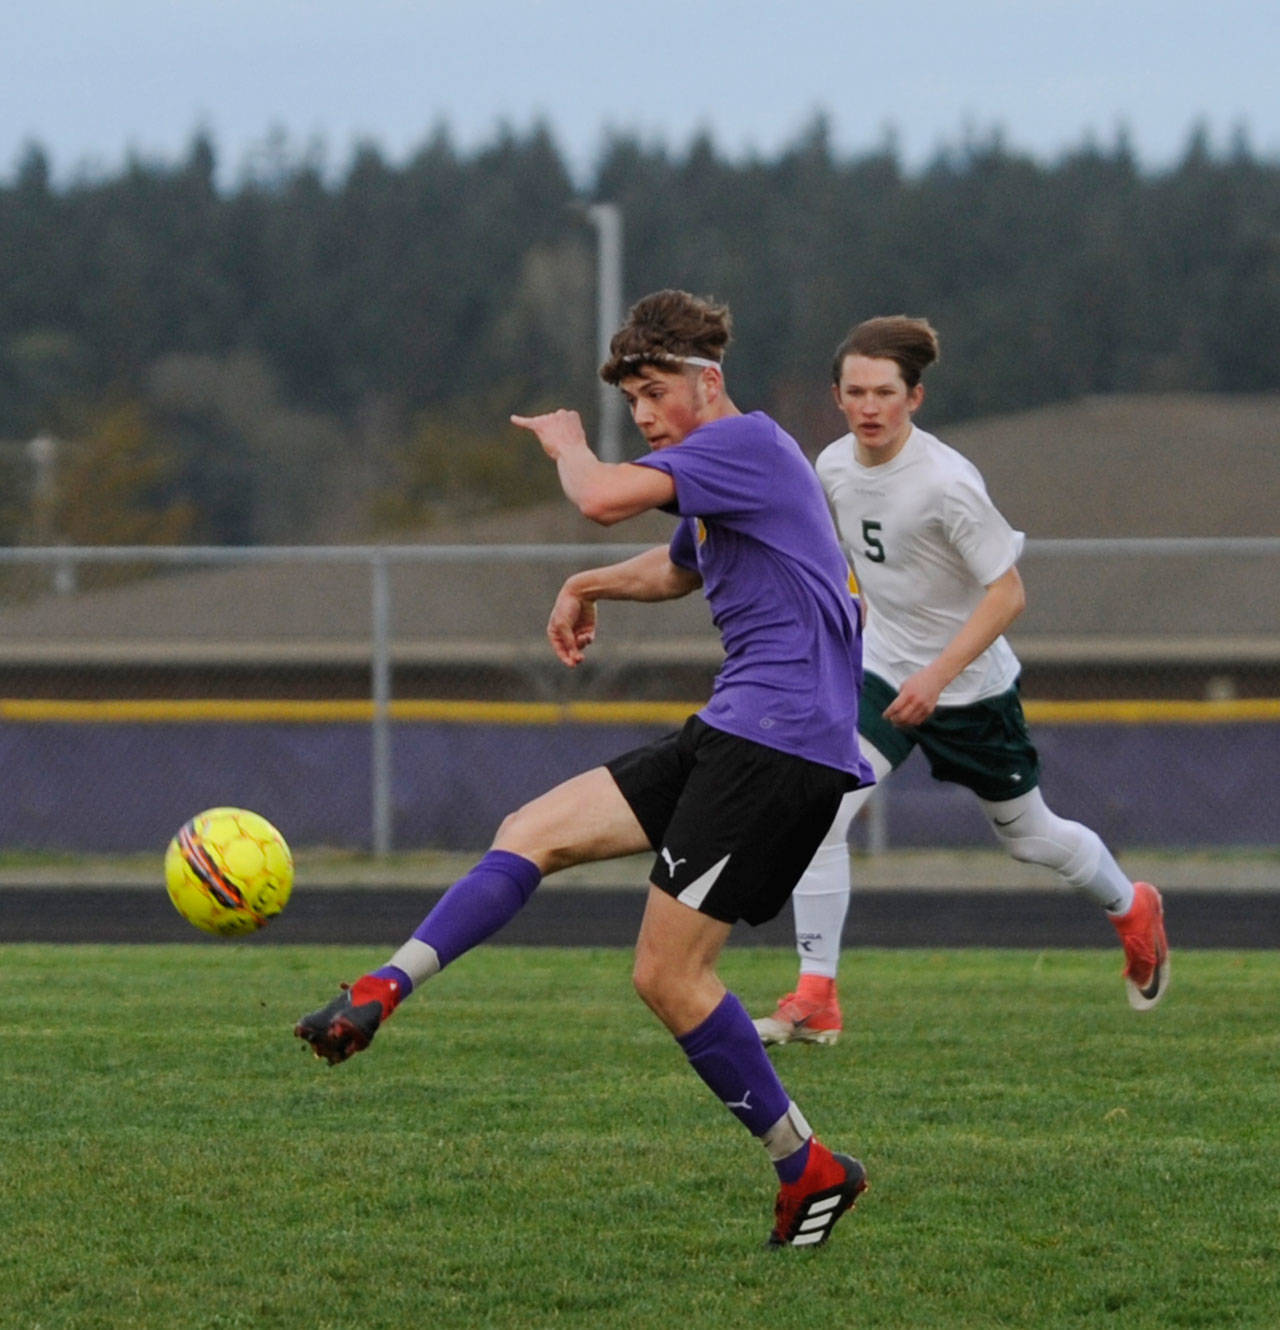 Boys soccer: Wolves remain unbeaten with wins over Riders, Knights